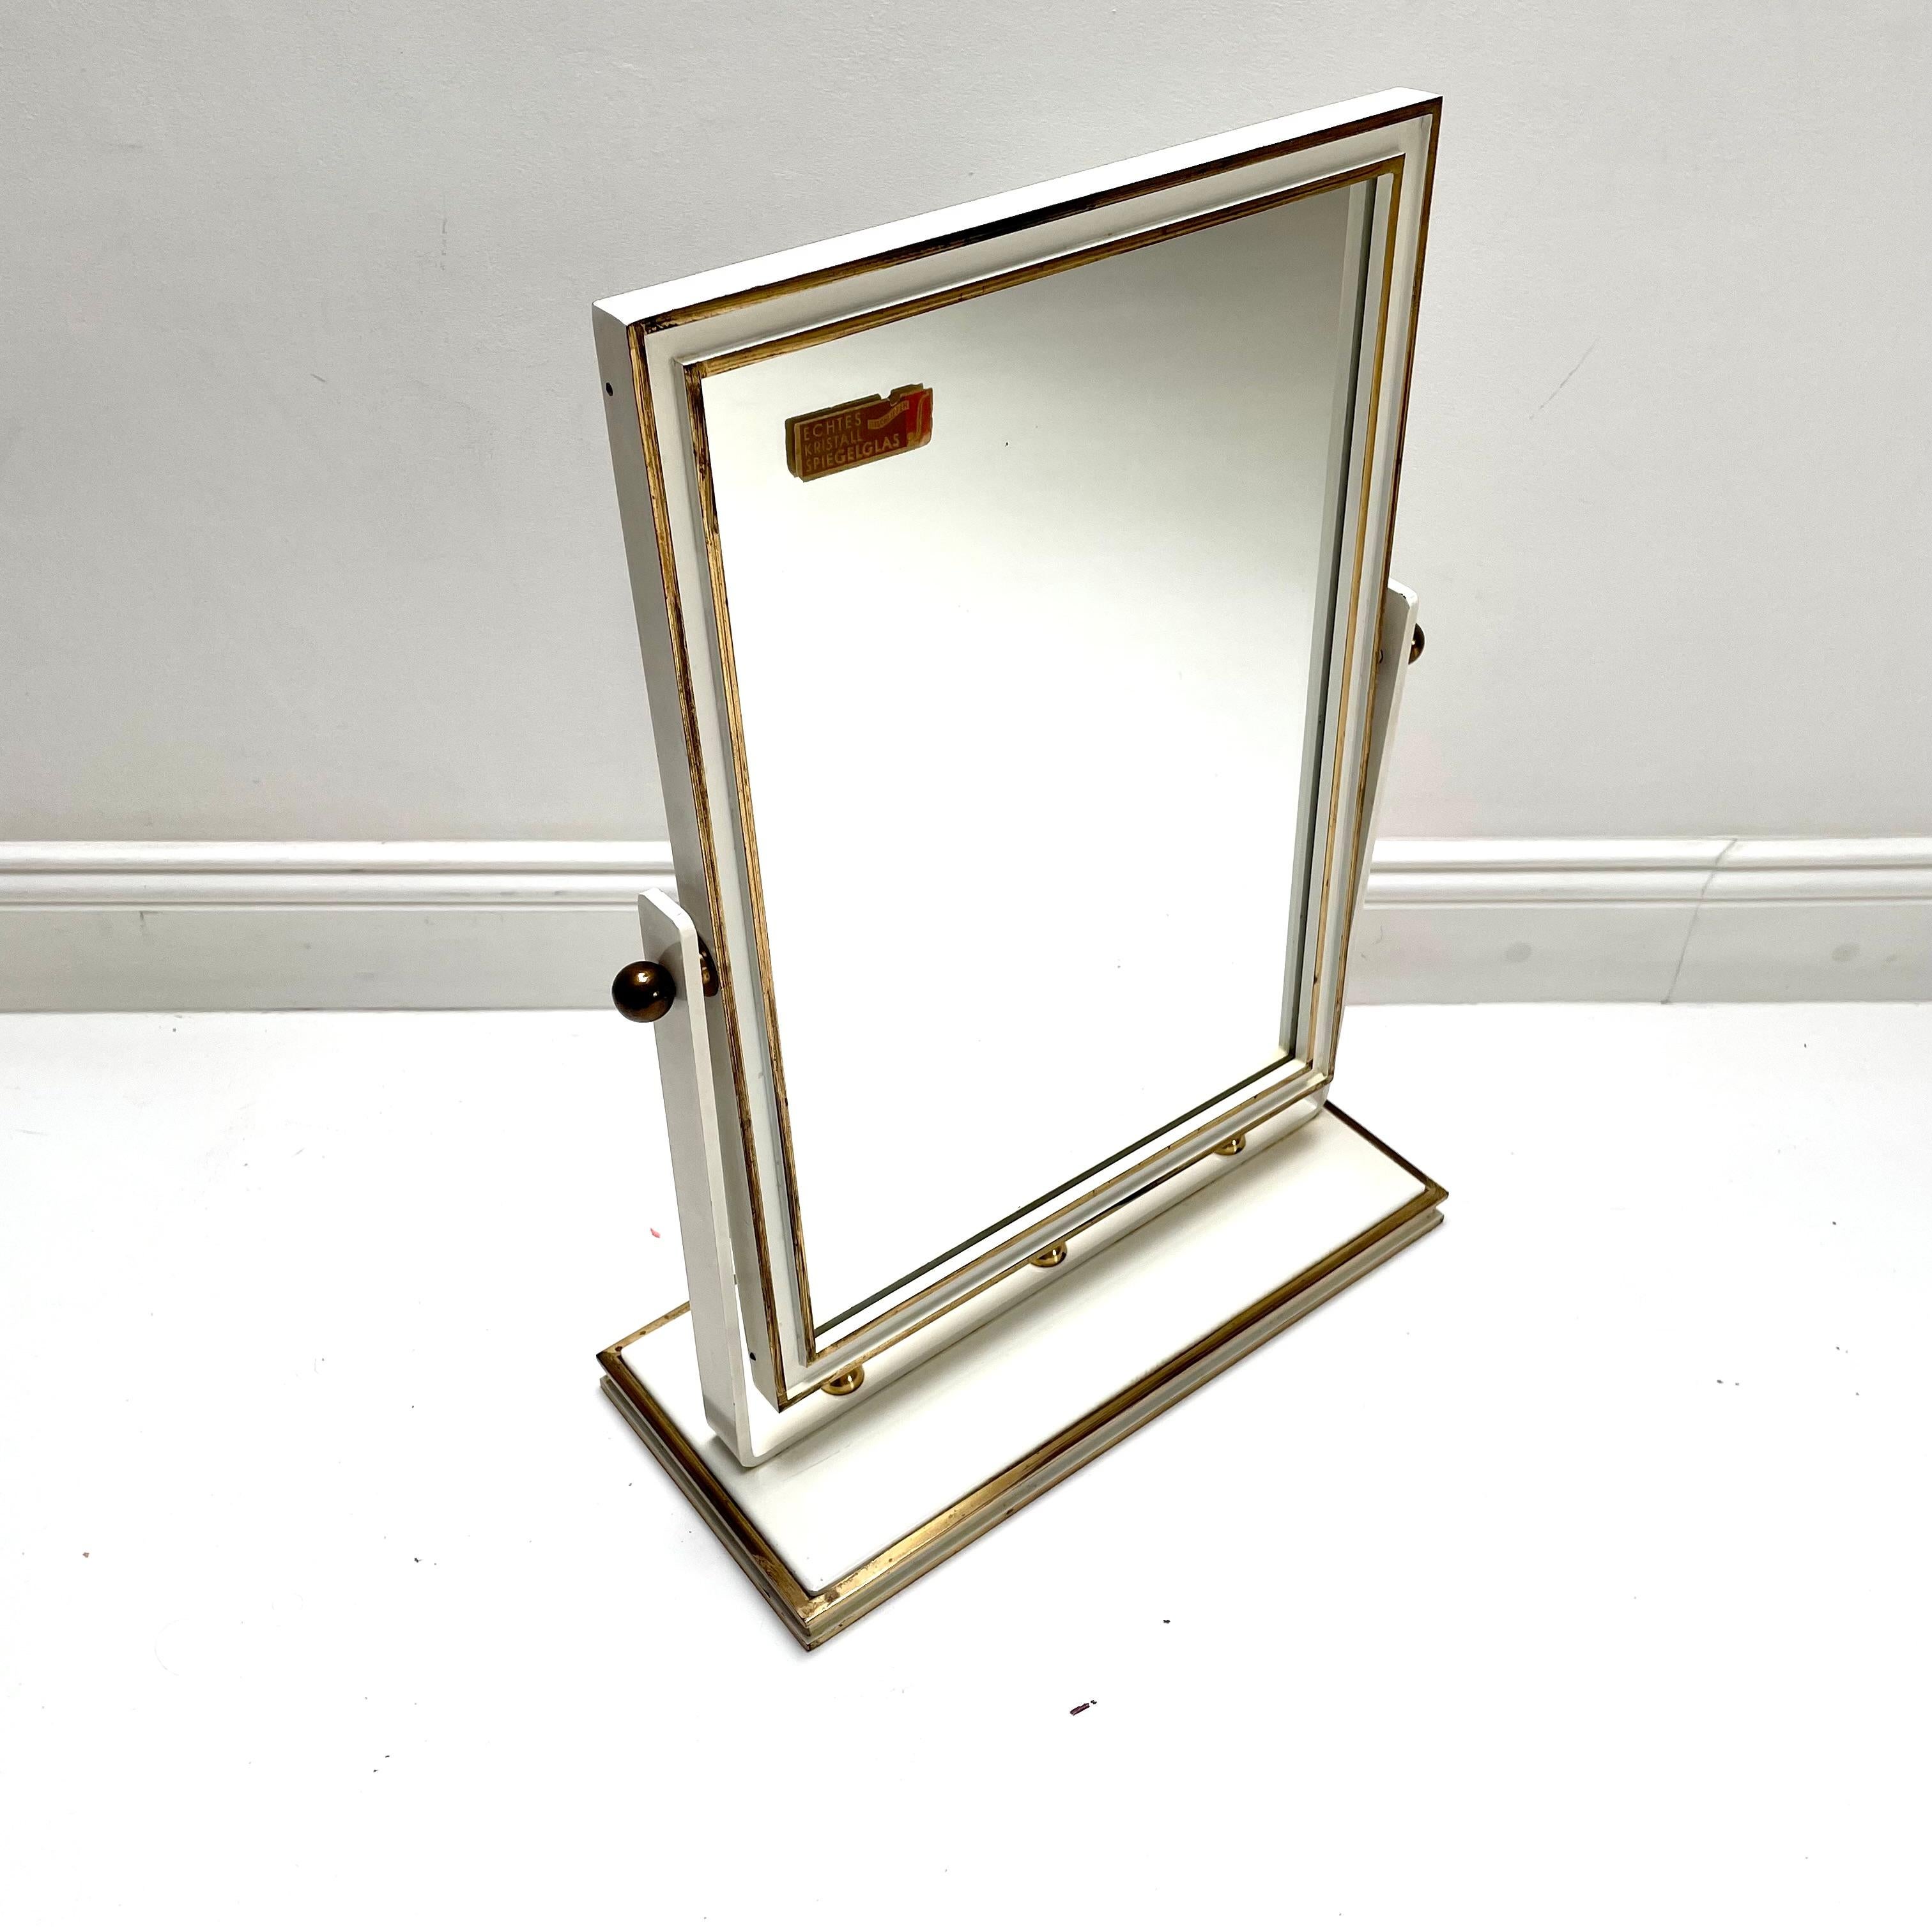 Article:

Table mirror


Producer:

Vereinigte Werkstätten München


Origin:

Germany


Material:

glass, brass, metal 


Decade:

1950s


Description:

This original midcentury table mirror was produced in the 1950s in Germany by the Vereinigte